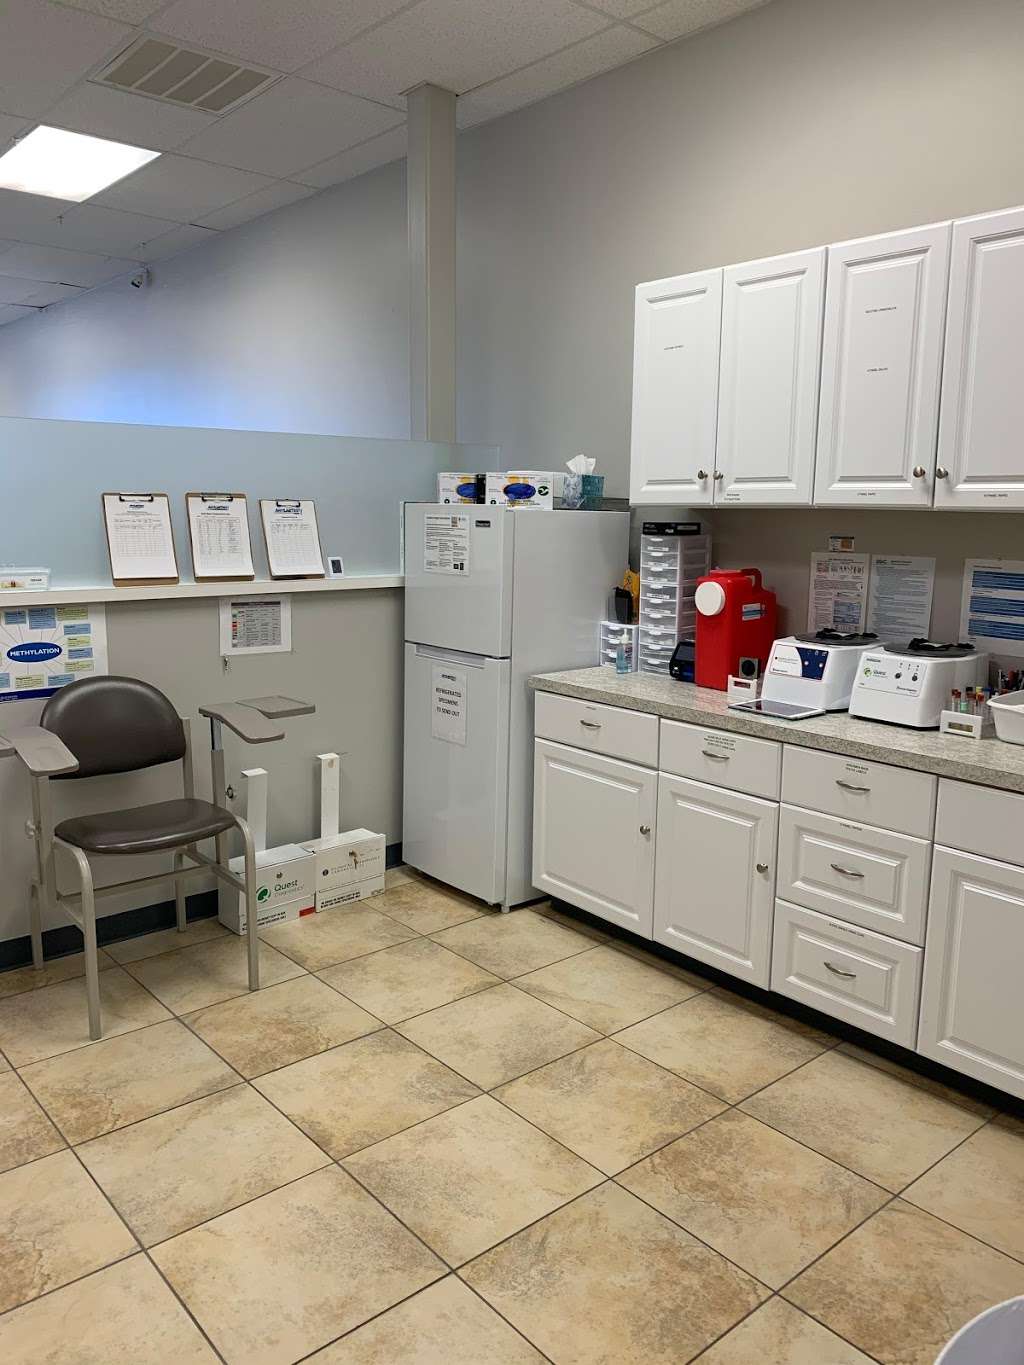 Any Lab Test Now | 1221 Flower Mound Rd Suite 310, Flower Mound, TX 75028 | Phone: (972) 691-2800